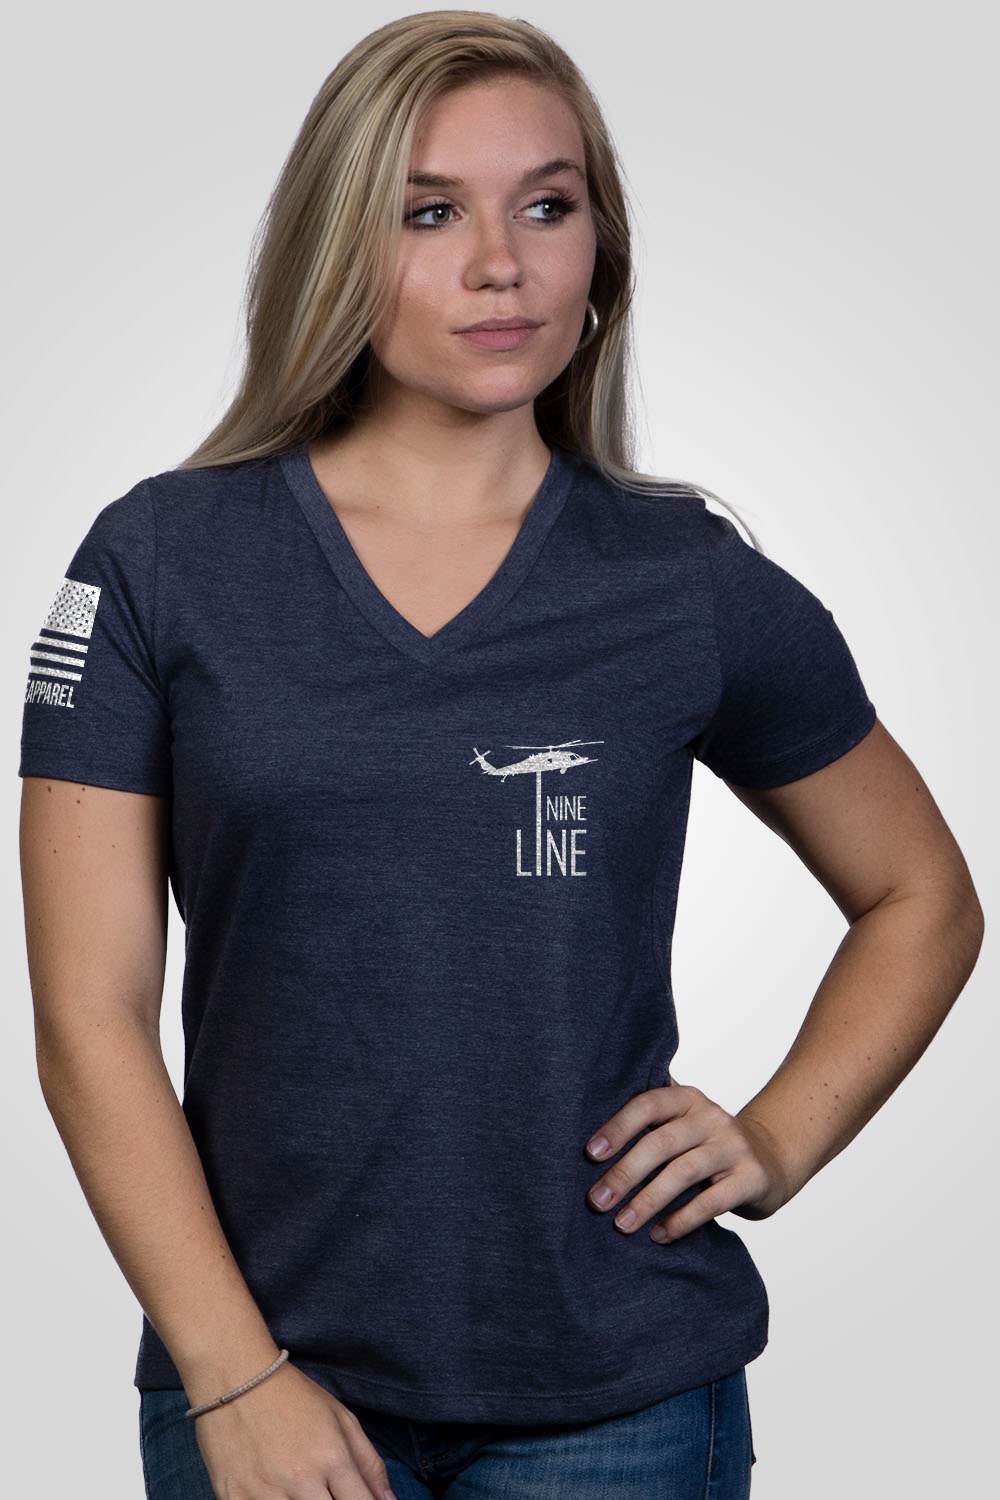 Women's Relaxed Fit V-Neck Shirt - I Stand - Nine Line Apparel